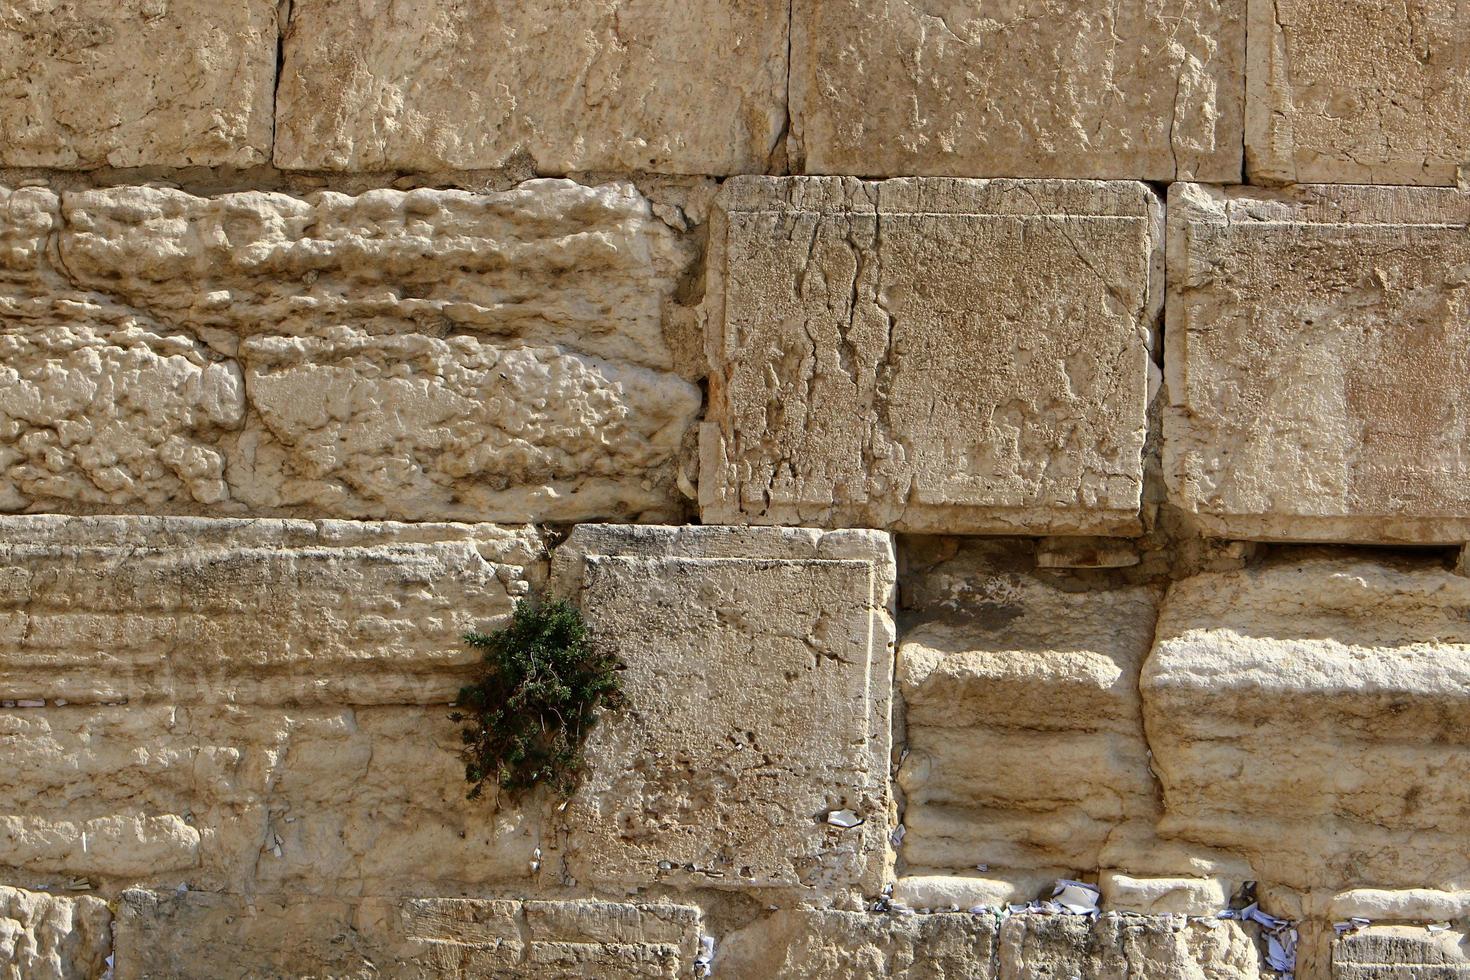 Notes in the Wailing Wall in Jerusalem with their requests and desires addressed to God. photo